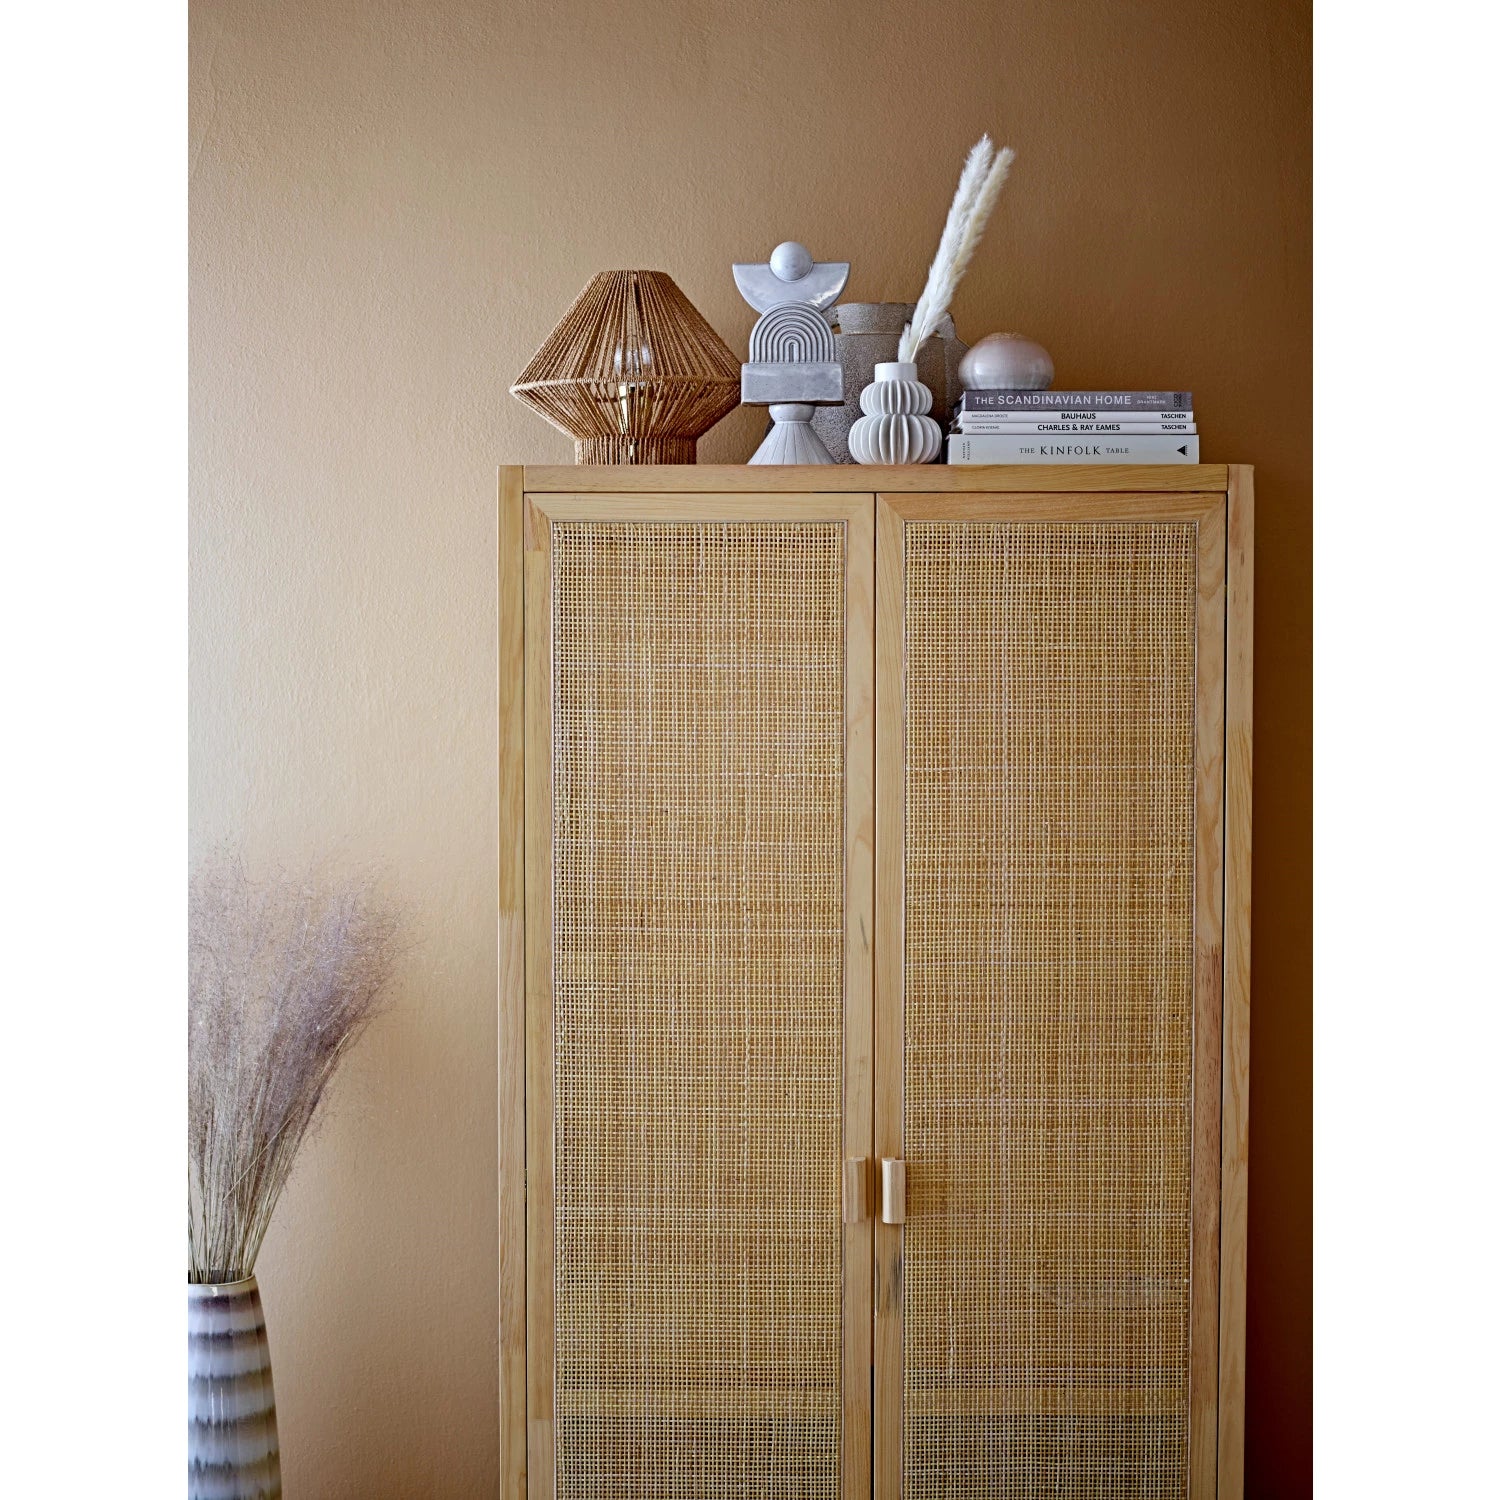 A tall wooden cabinet with rattan doors against a warm beige wall in a Scottsdale, Arizona bungalow, decorated with a stack of books, two small sculptures, and a Bloomingville Pleated Vase atop it. A vase with dried grasses is placed to the left side on the floor.